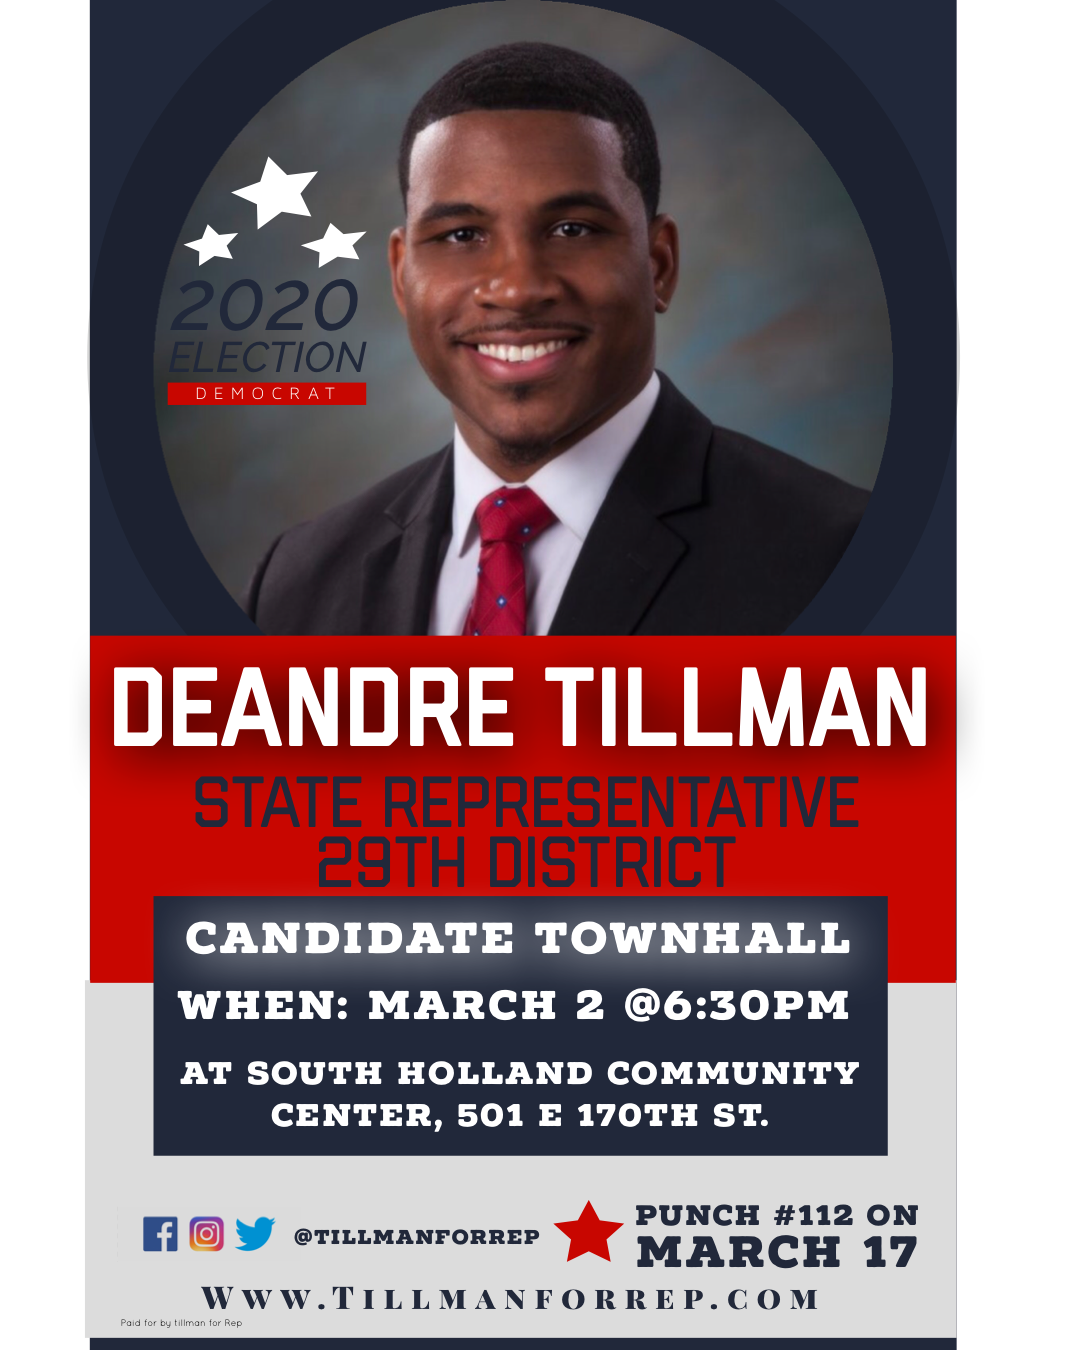 Candidate Townhall - DeAndre Tillman for State Representative | 29th